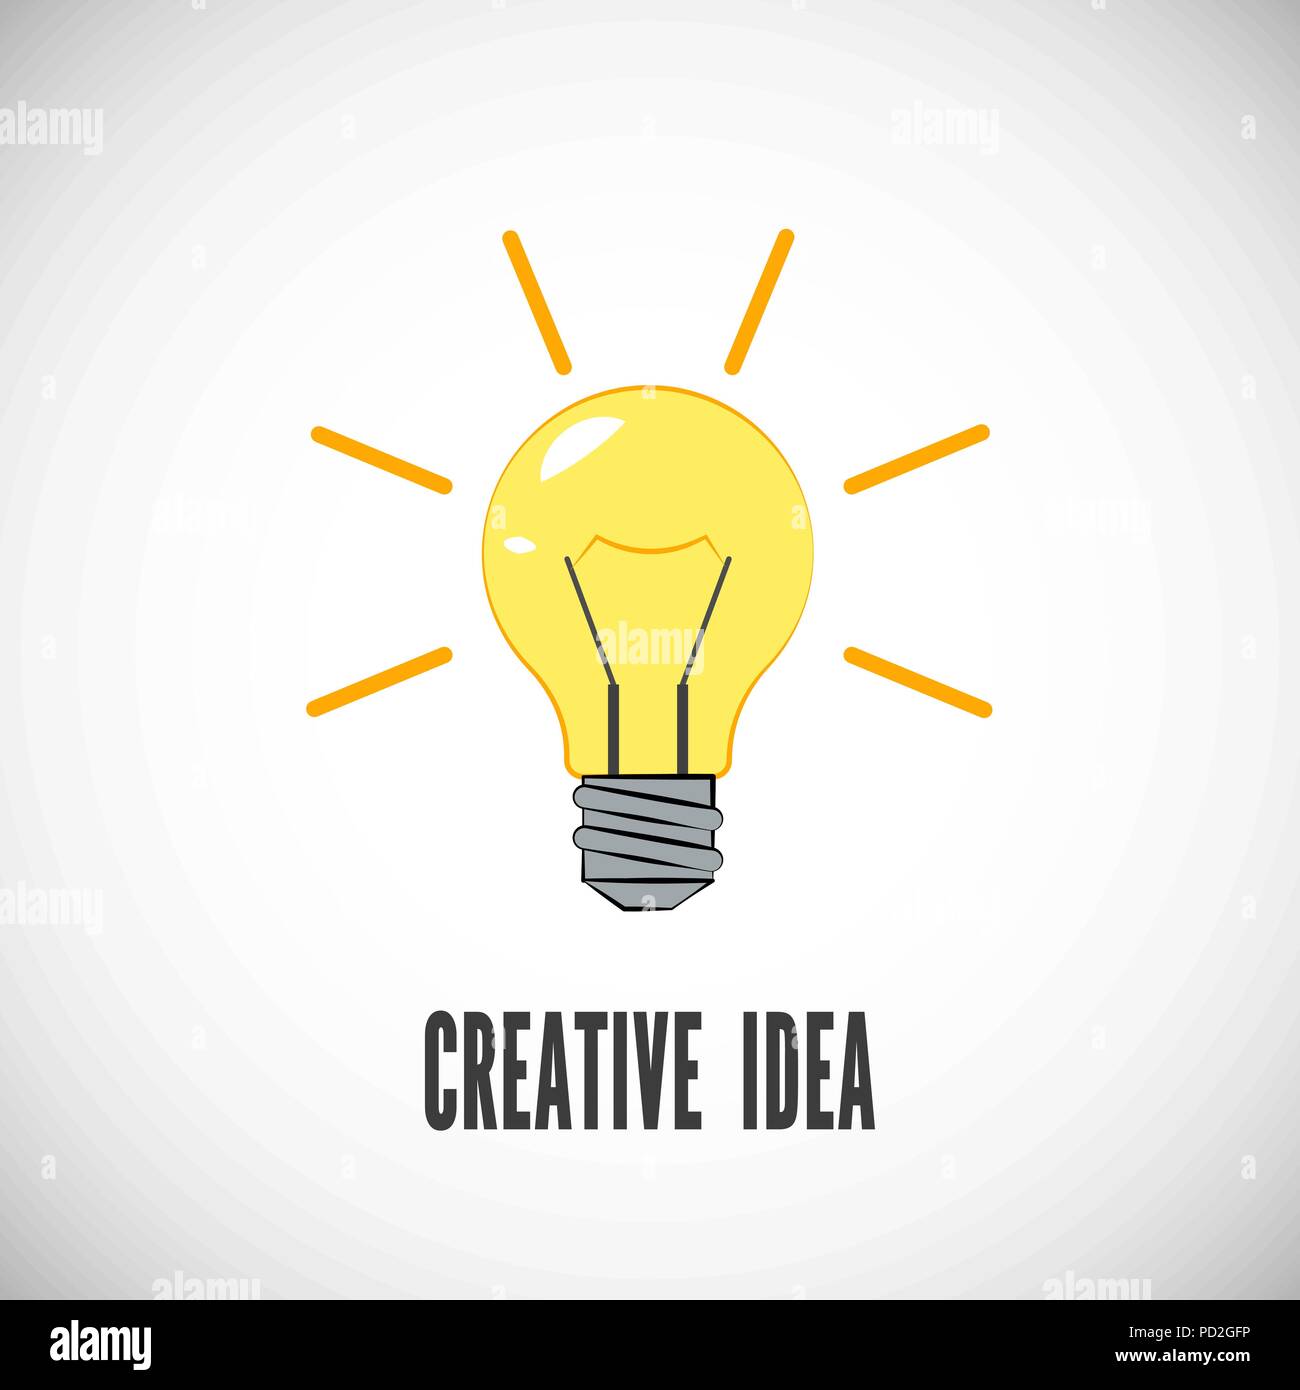 Creative idea. Light bulb with rays shine. Business or start up concept. Energy and idea symbol. Vector illustration Stock Vector